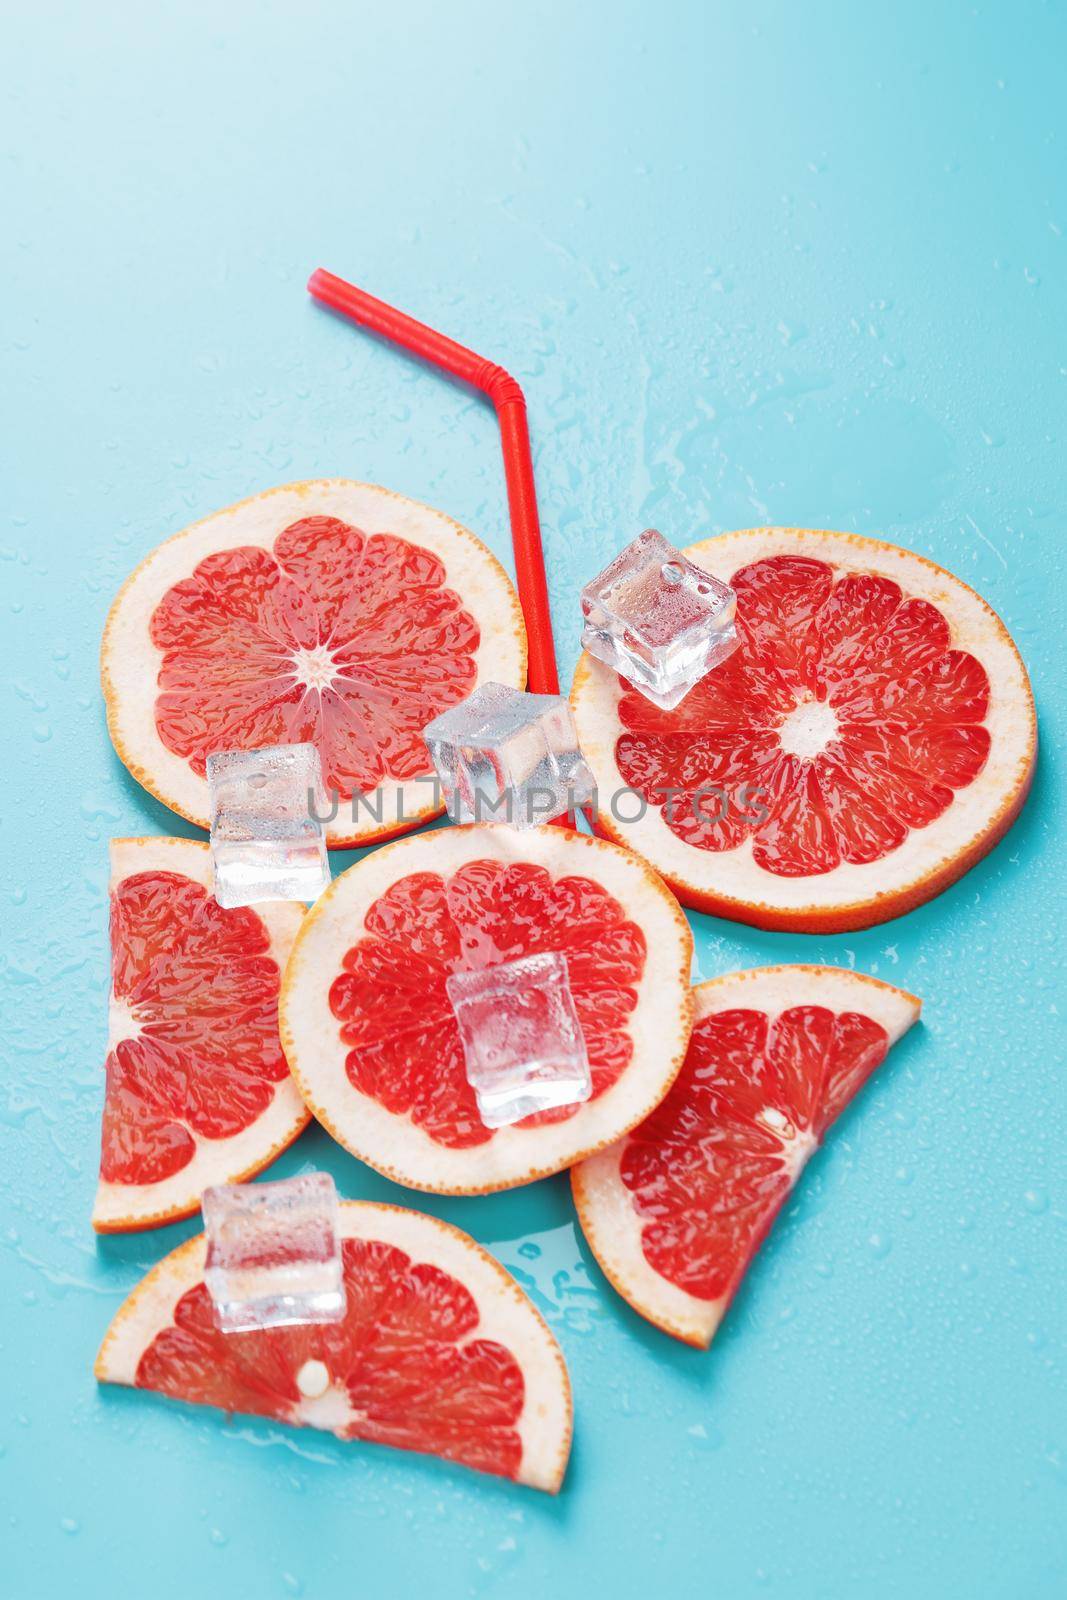 A composition of grapefruit slices and ice cubes with a blue background in the form of a refreshing drink by AlexGrec